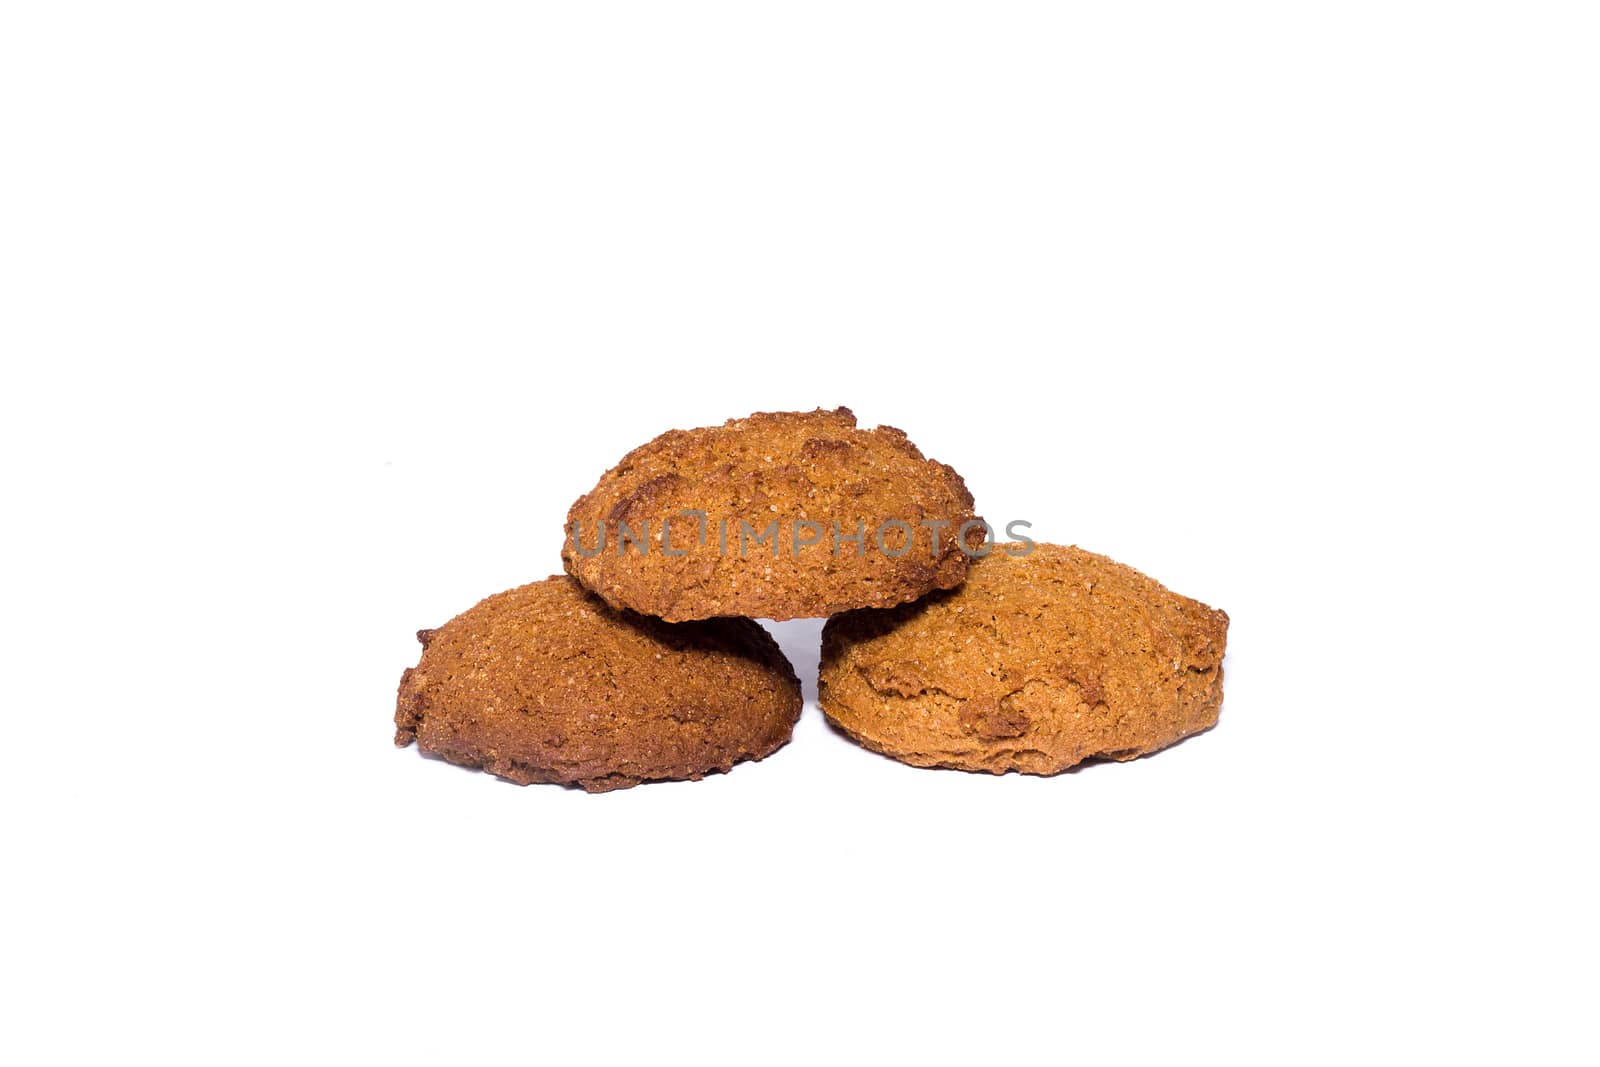 Three oatmeal cookies. Healthy diet isolated on white background.